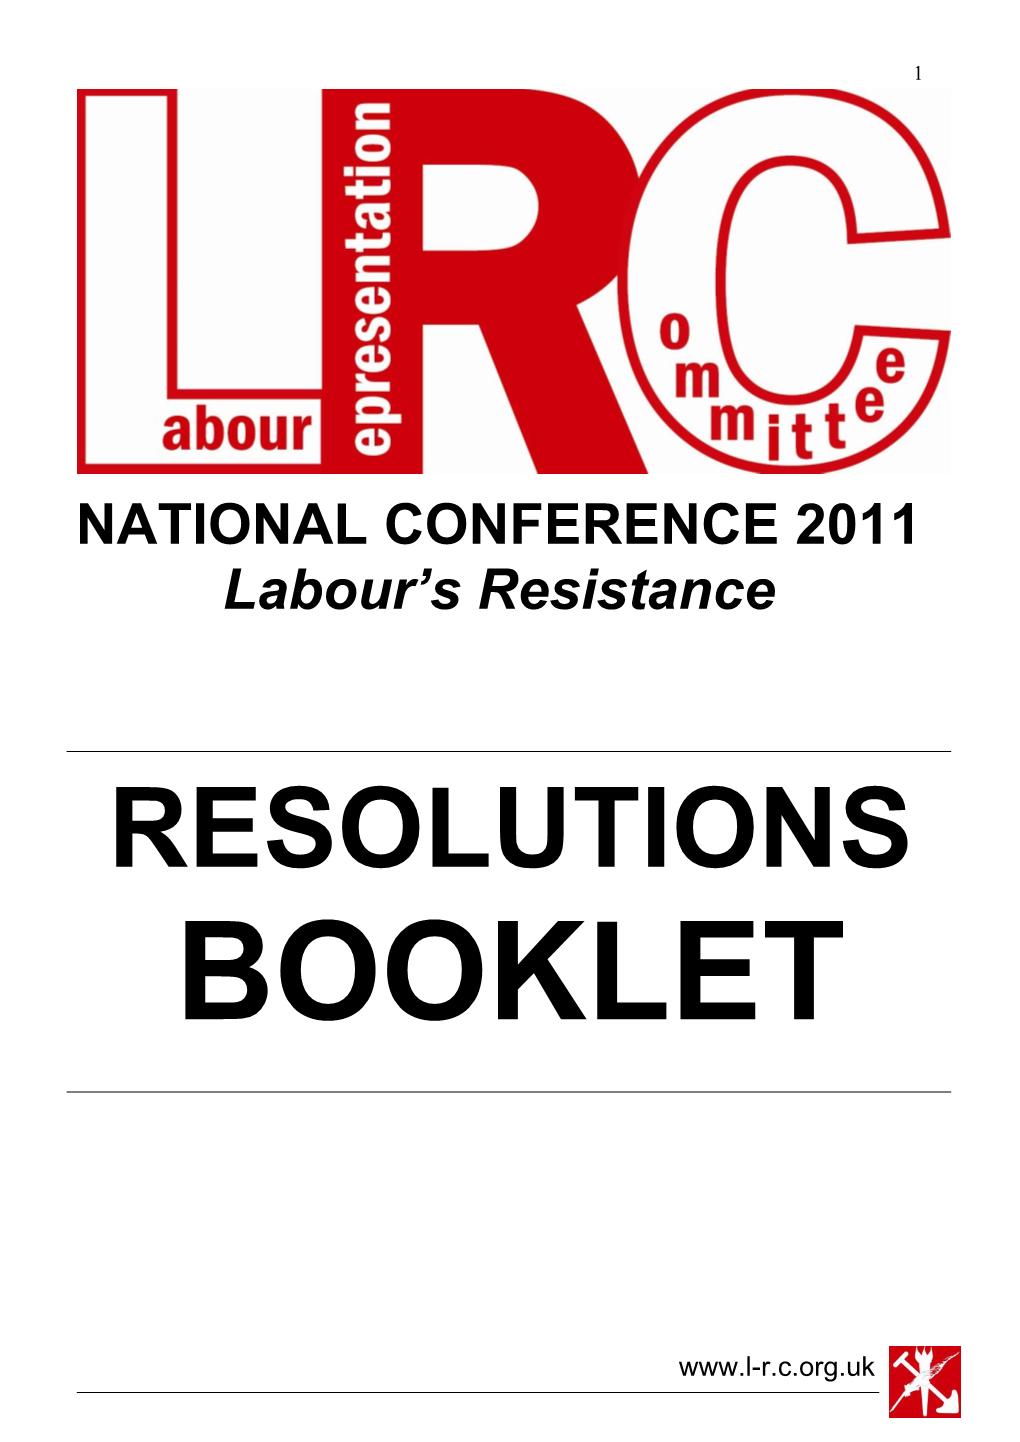 Resolutions Booklet